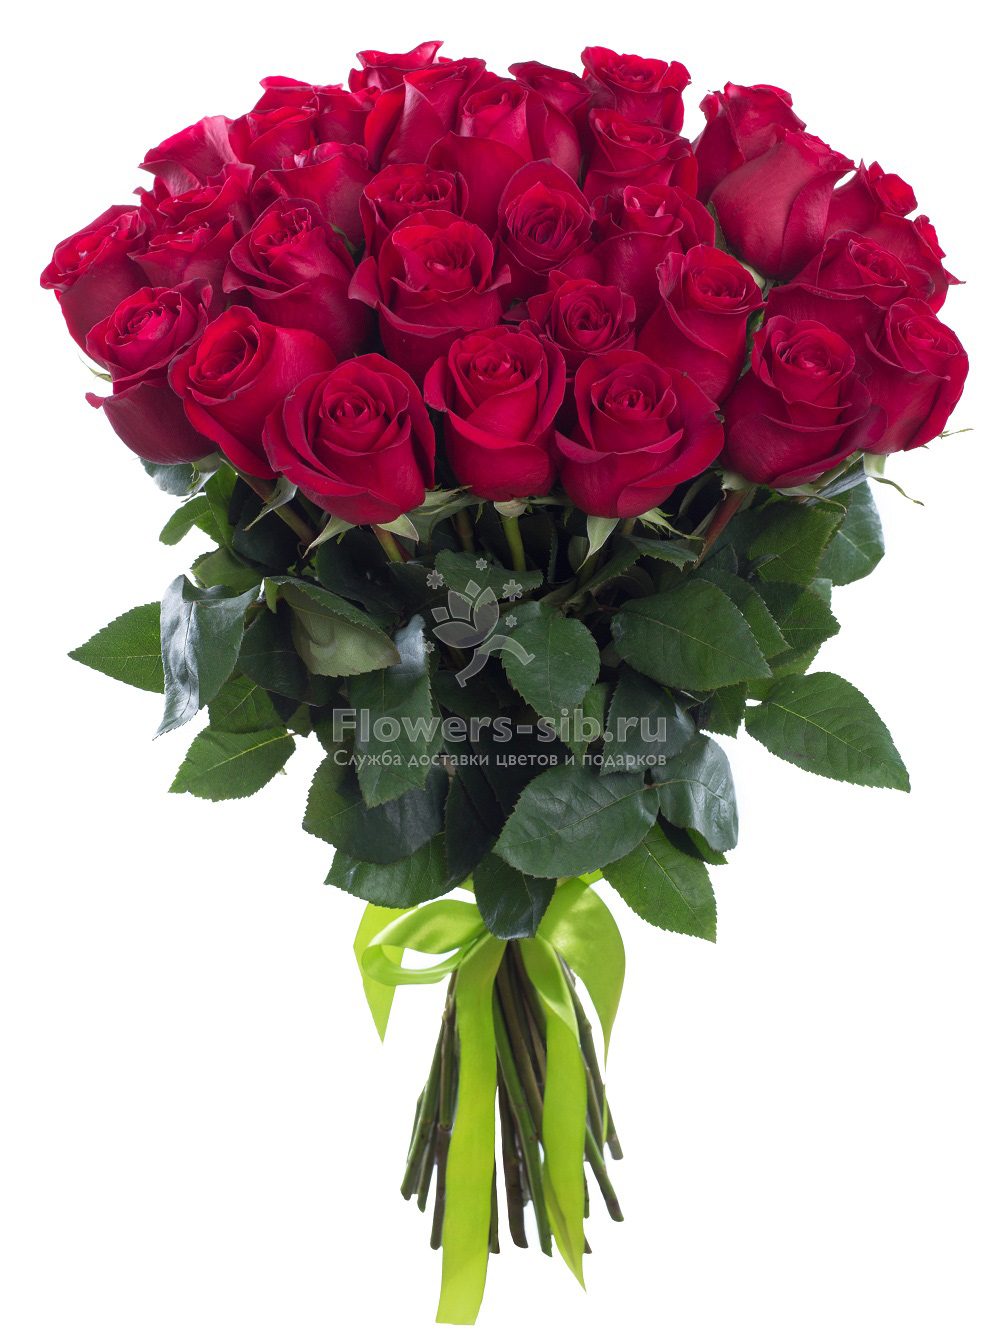 BOUQUET OF 37 ROSES